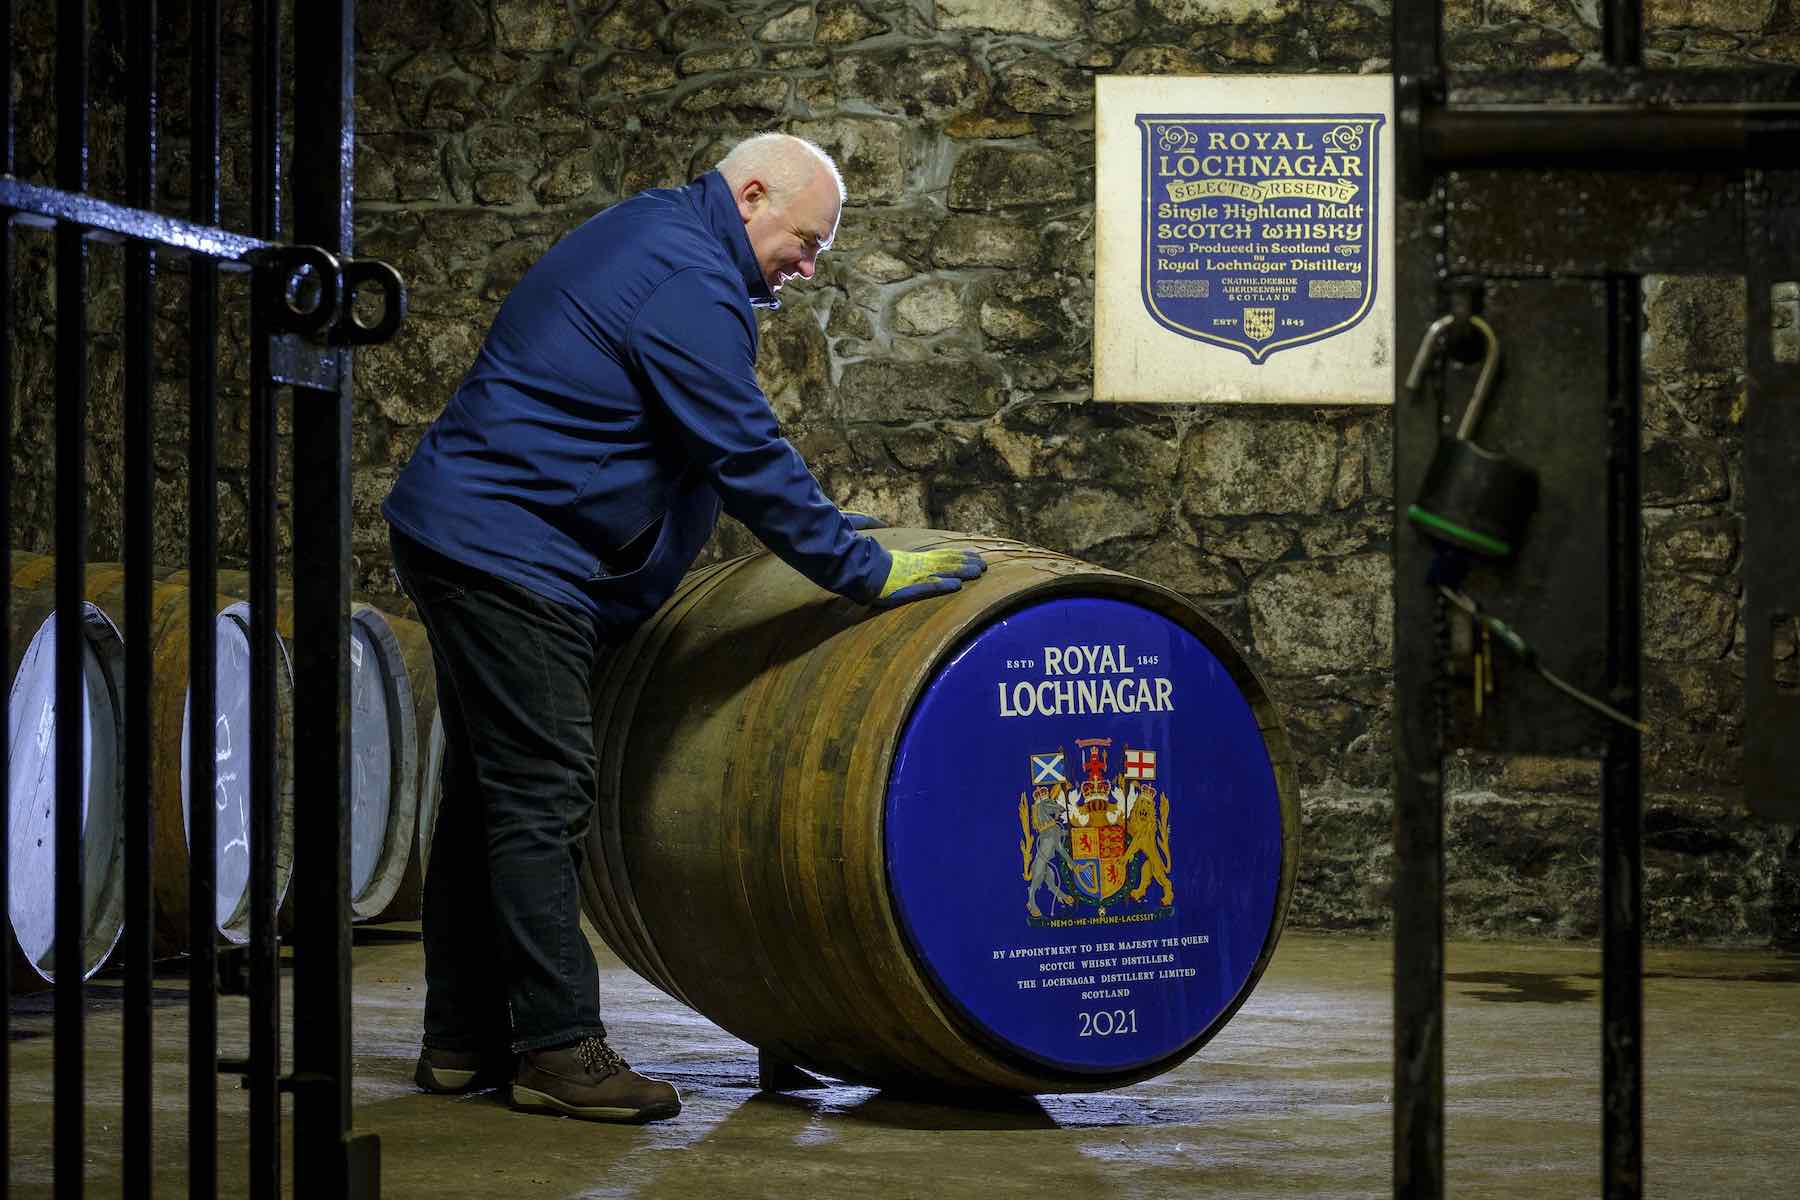 Diageo's Royal Warrant Holders : The Whisky Exchange